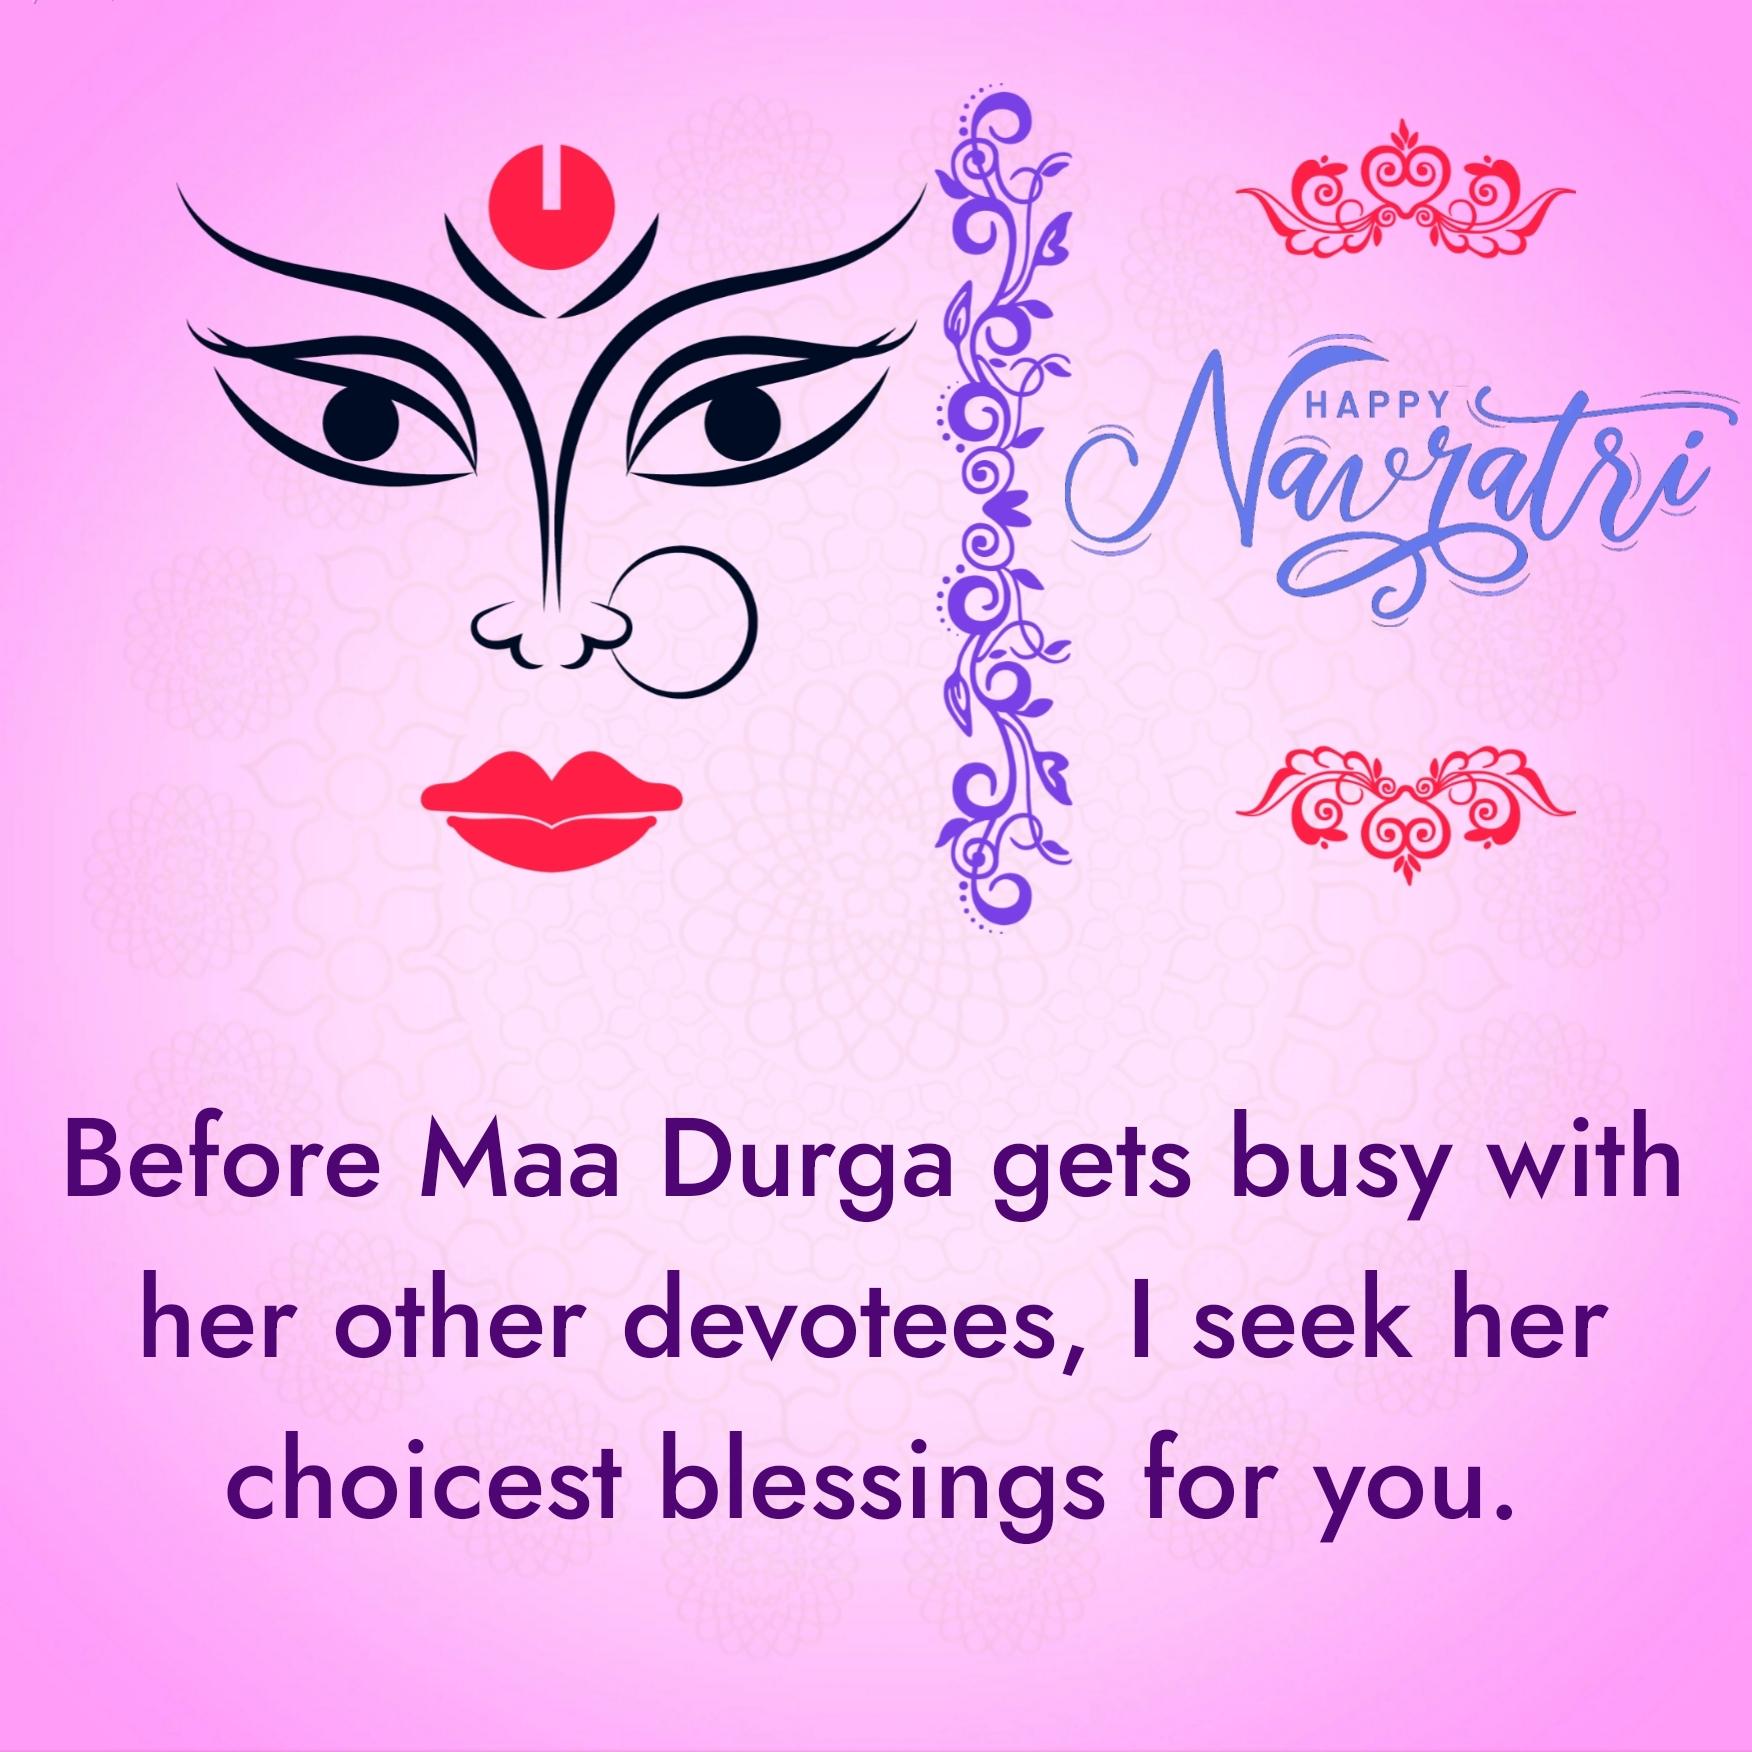 Before Maa Durga gets busy with her other devotees